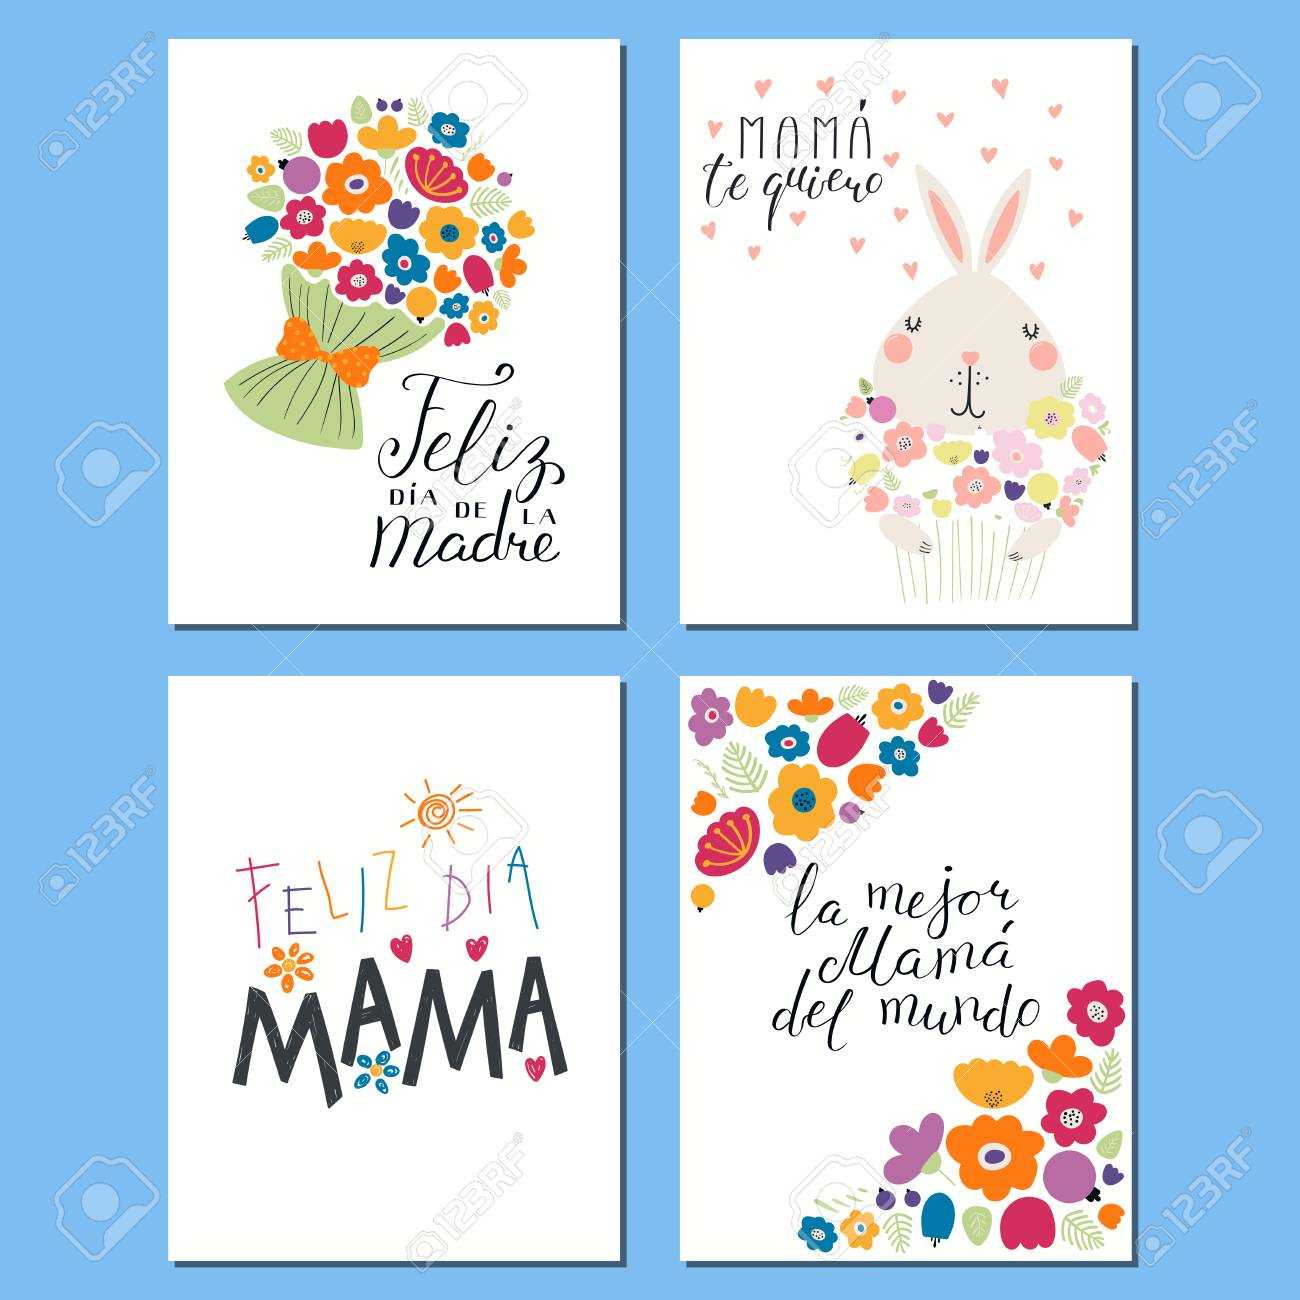 Set Of Mother's Day Cards Templates With Quotes In Spanish Throughout Mothers Day Card Templates